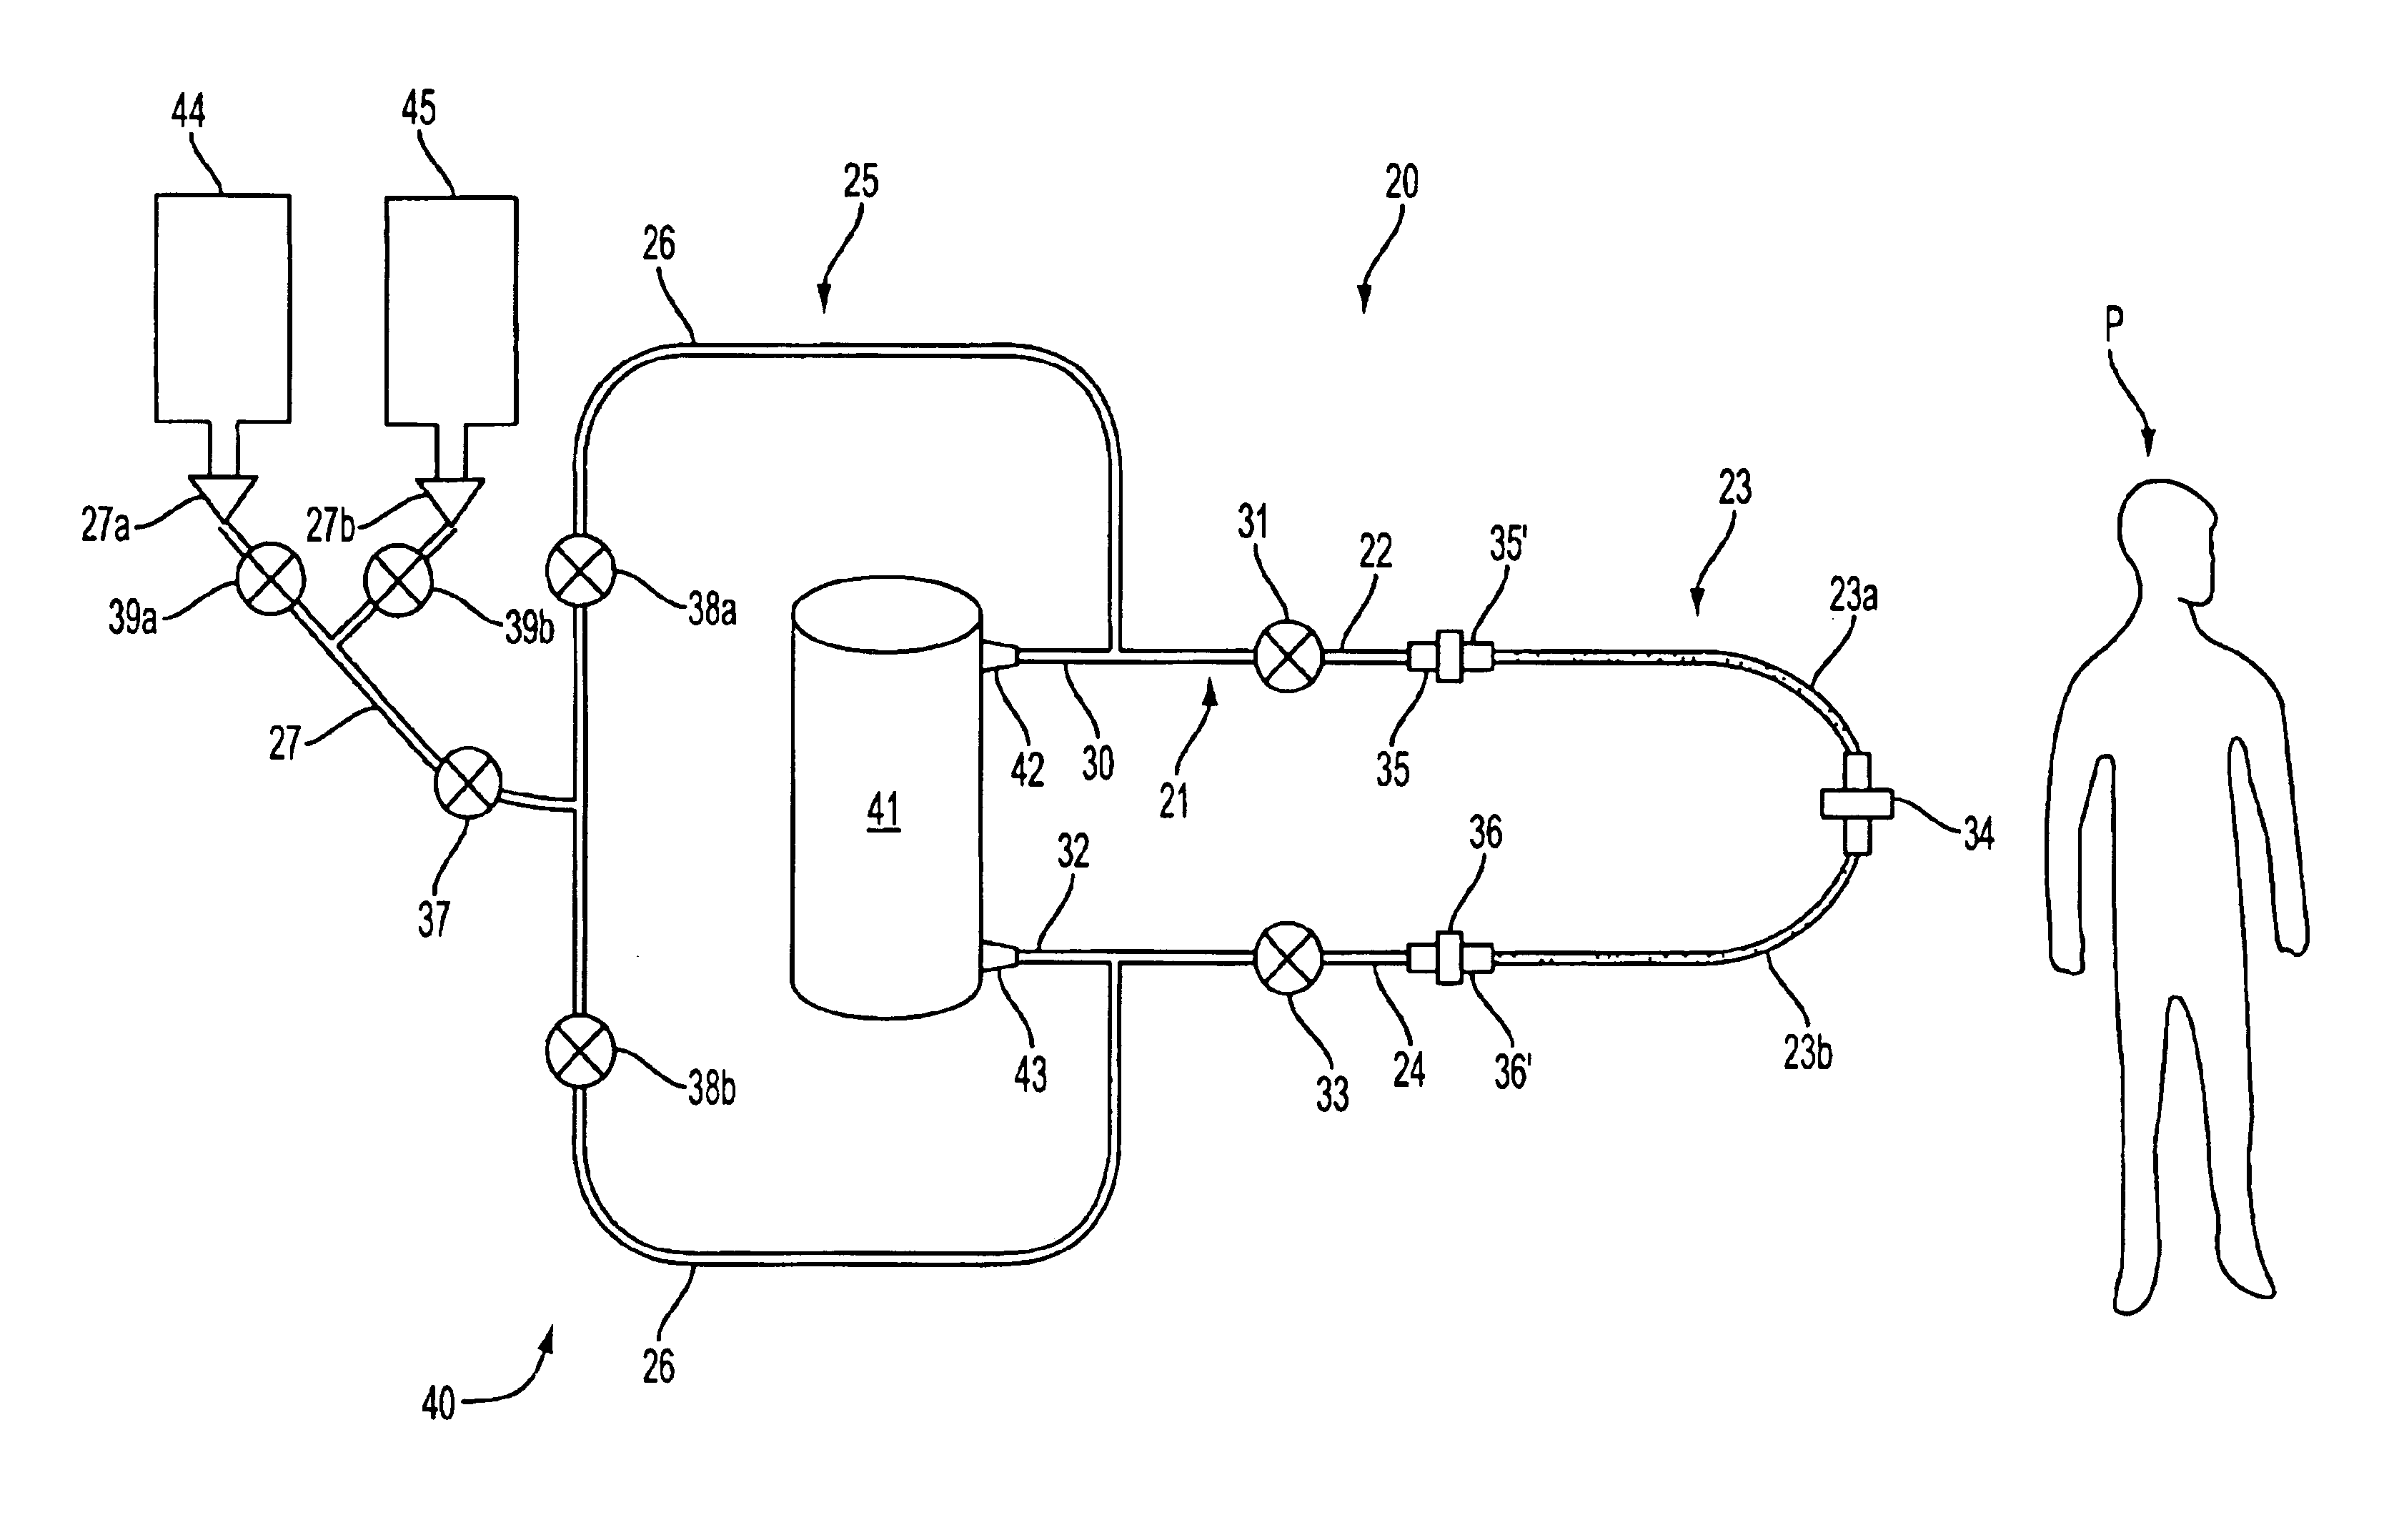 Tubing set for blood handling system and methods of use